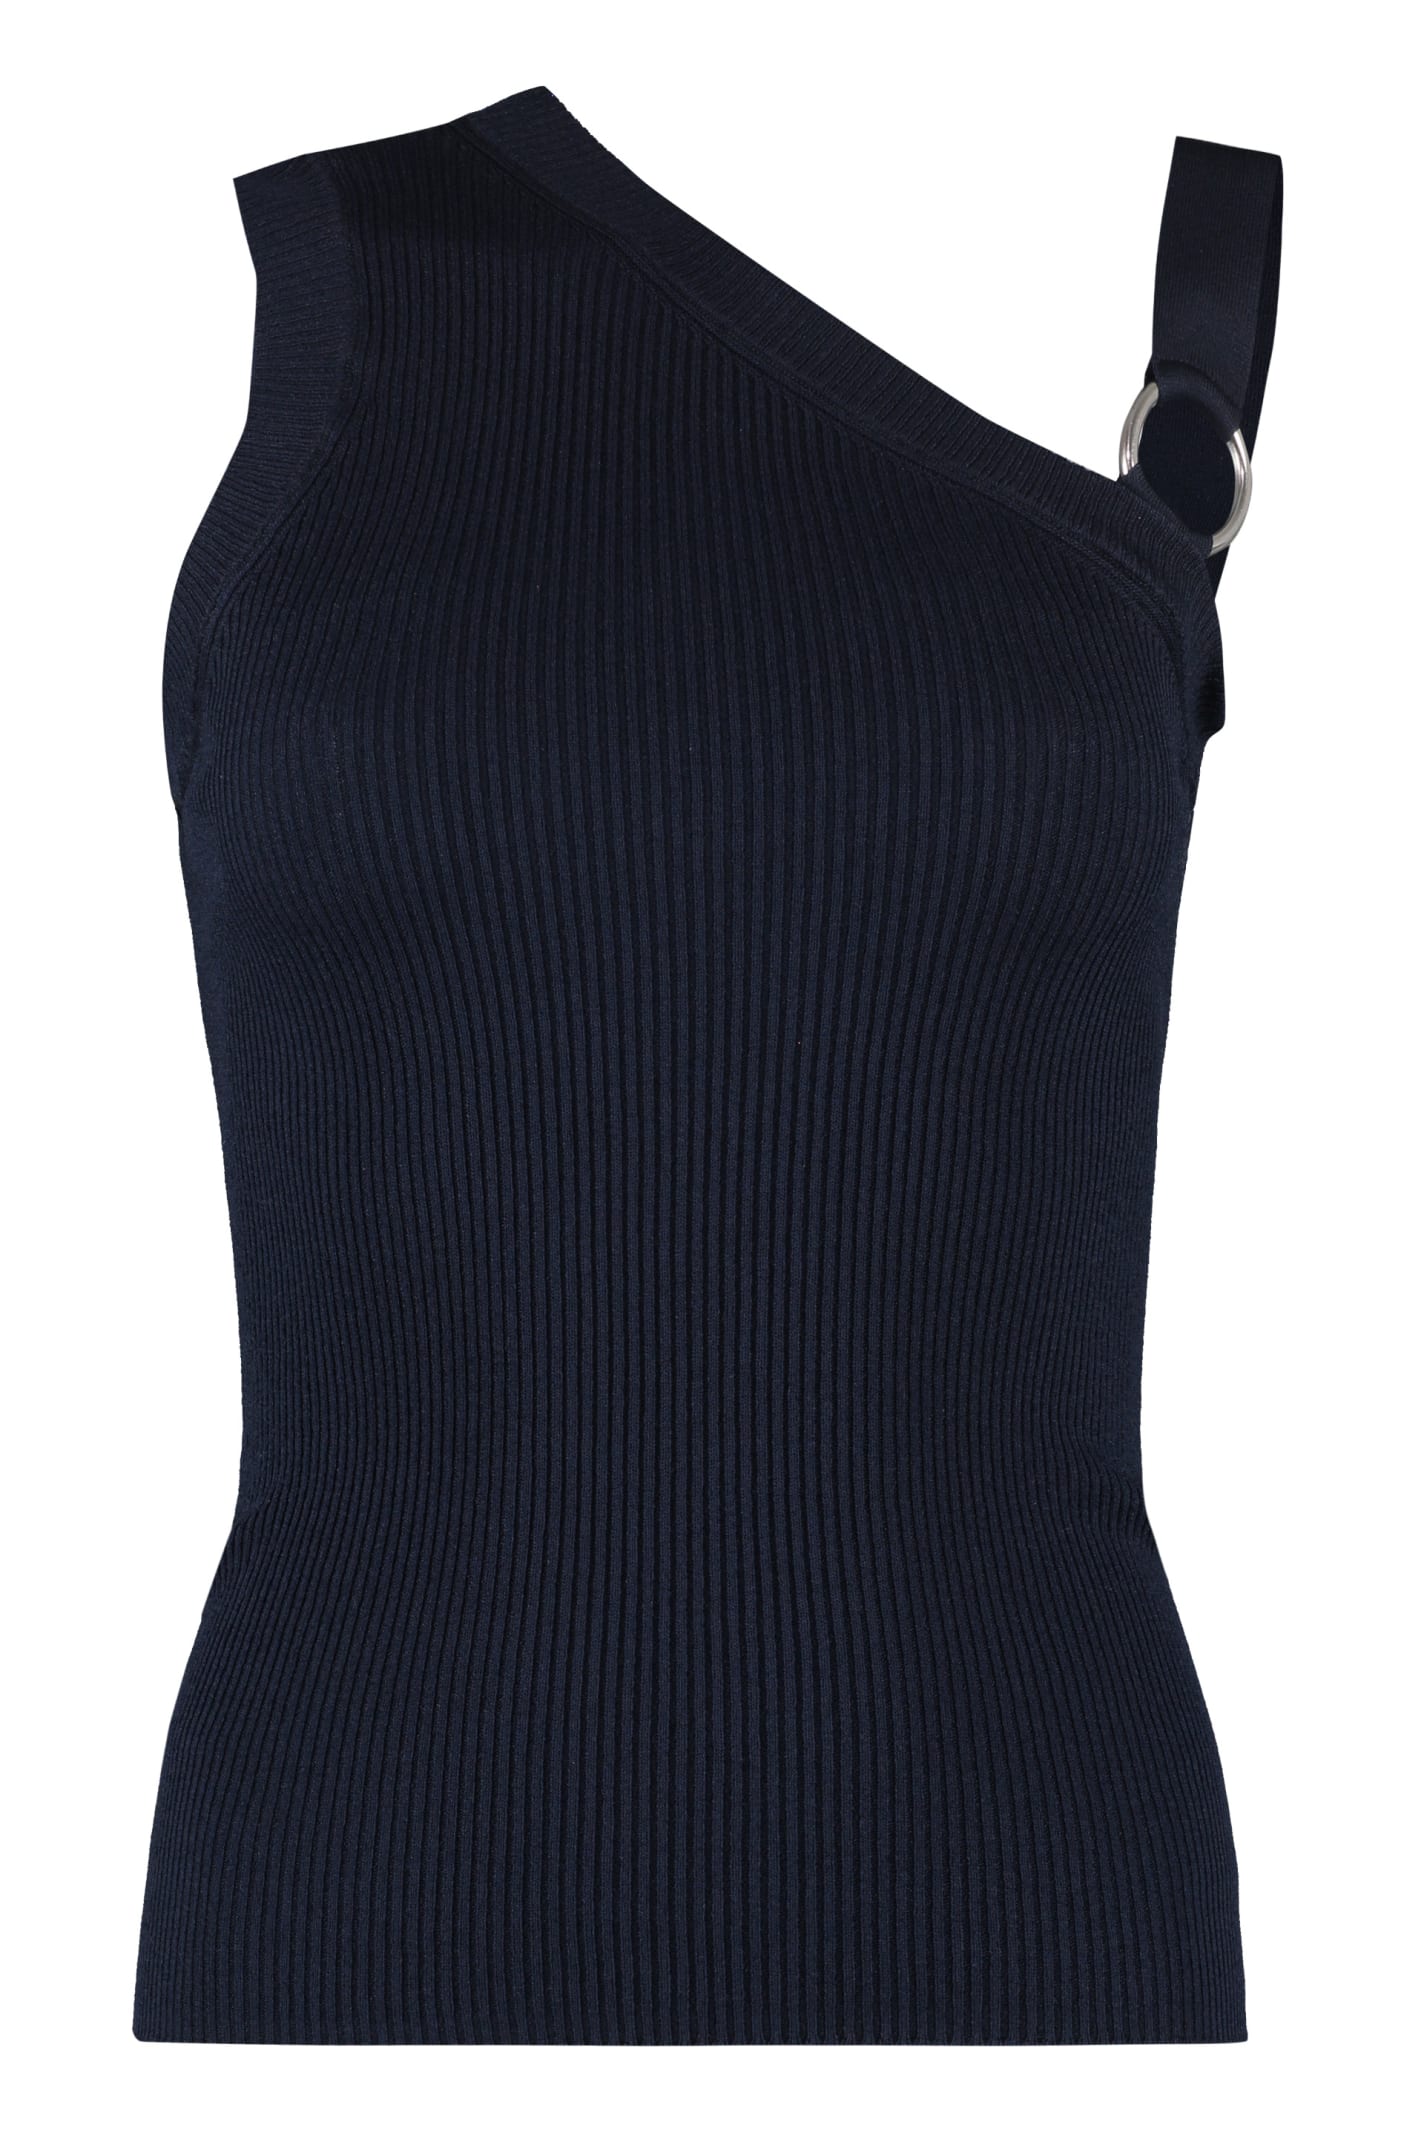 Boutique Moschino Ribbed Knit Top